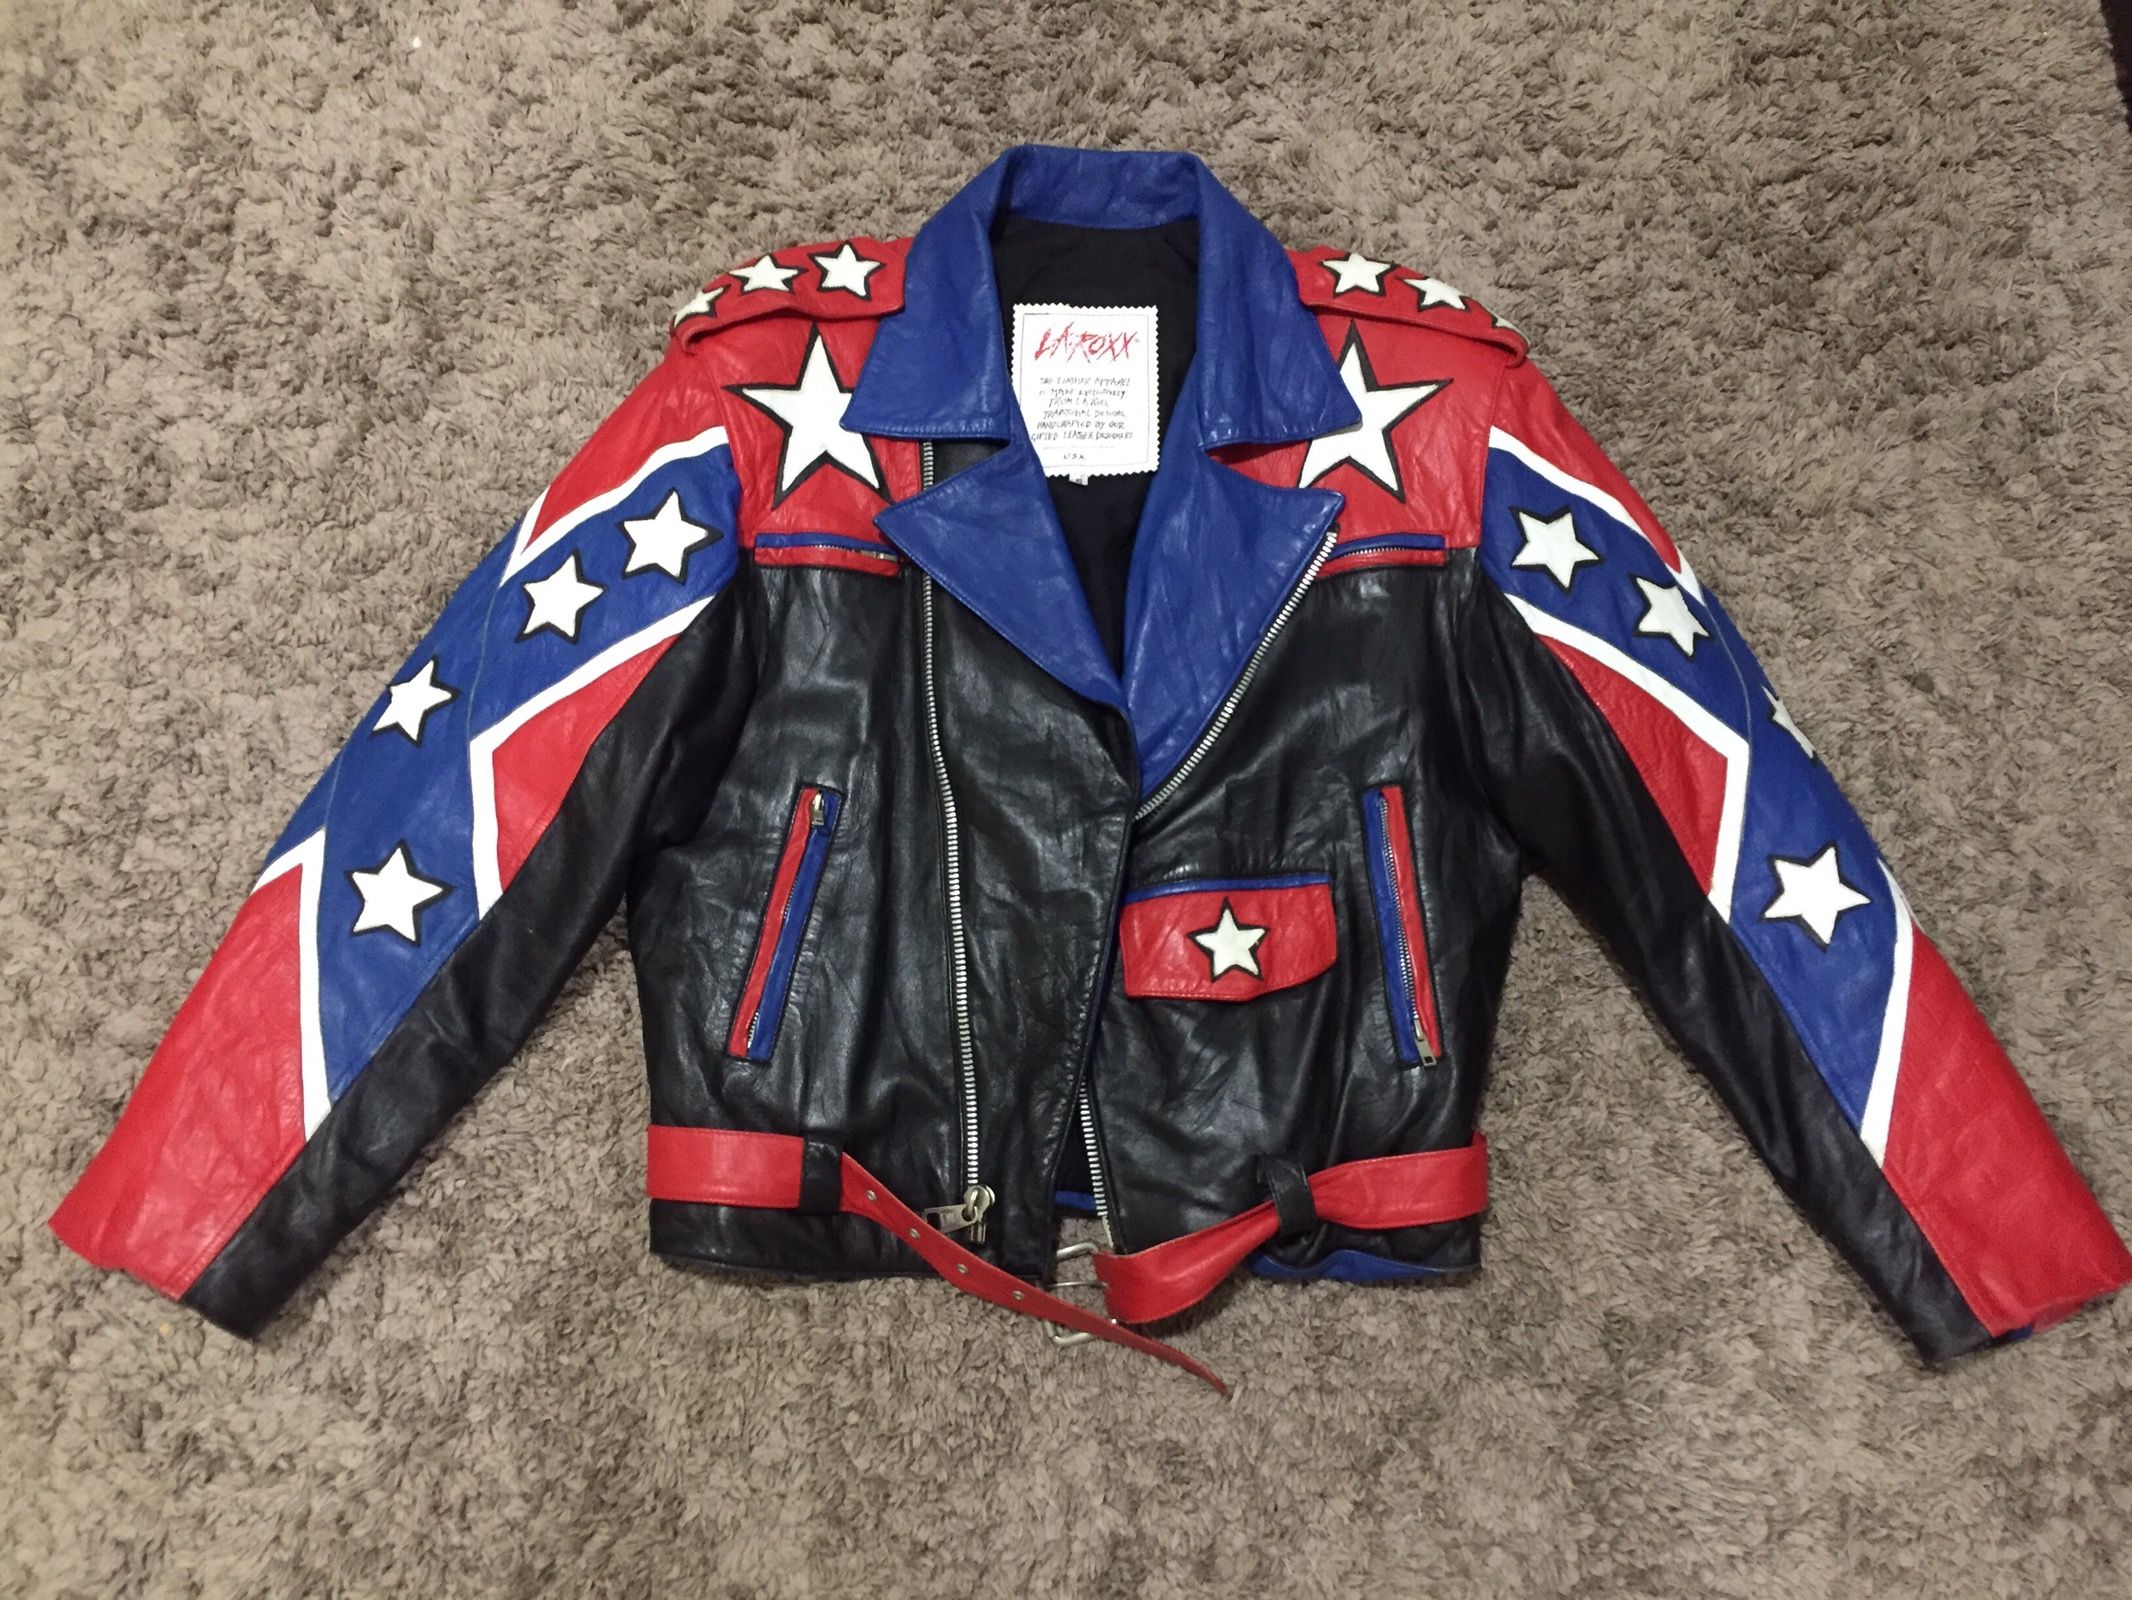 Very Rare REBEL CONFEDERATE LEATHER JAKET AXL's rose Size US S / EU 44-46 / 1 - 2 Preview